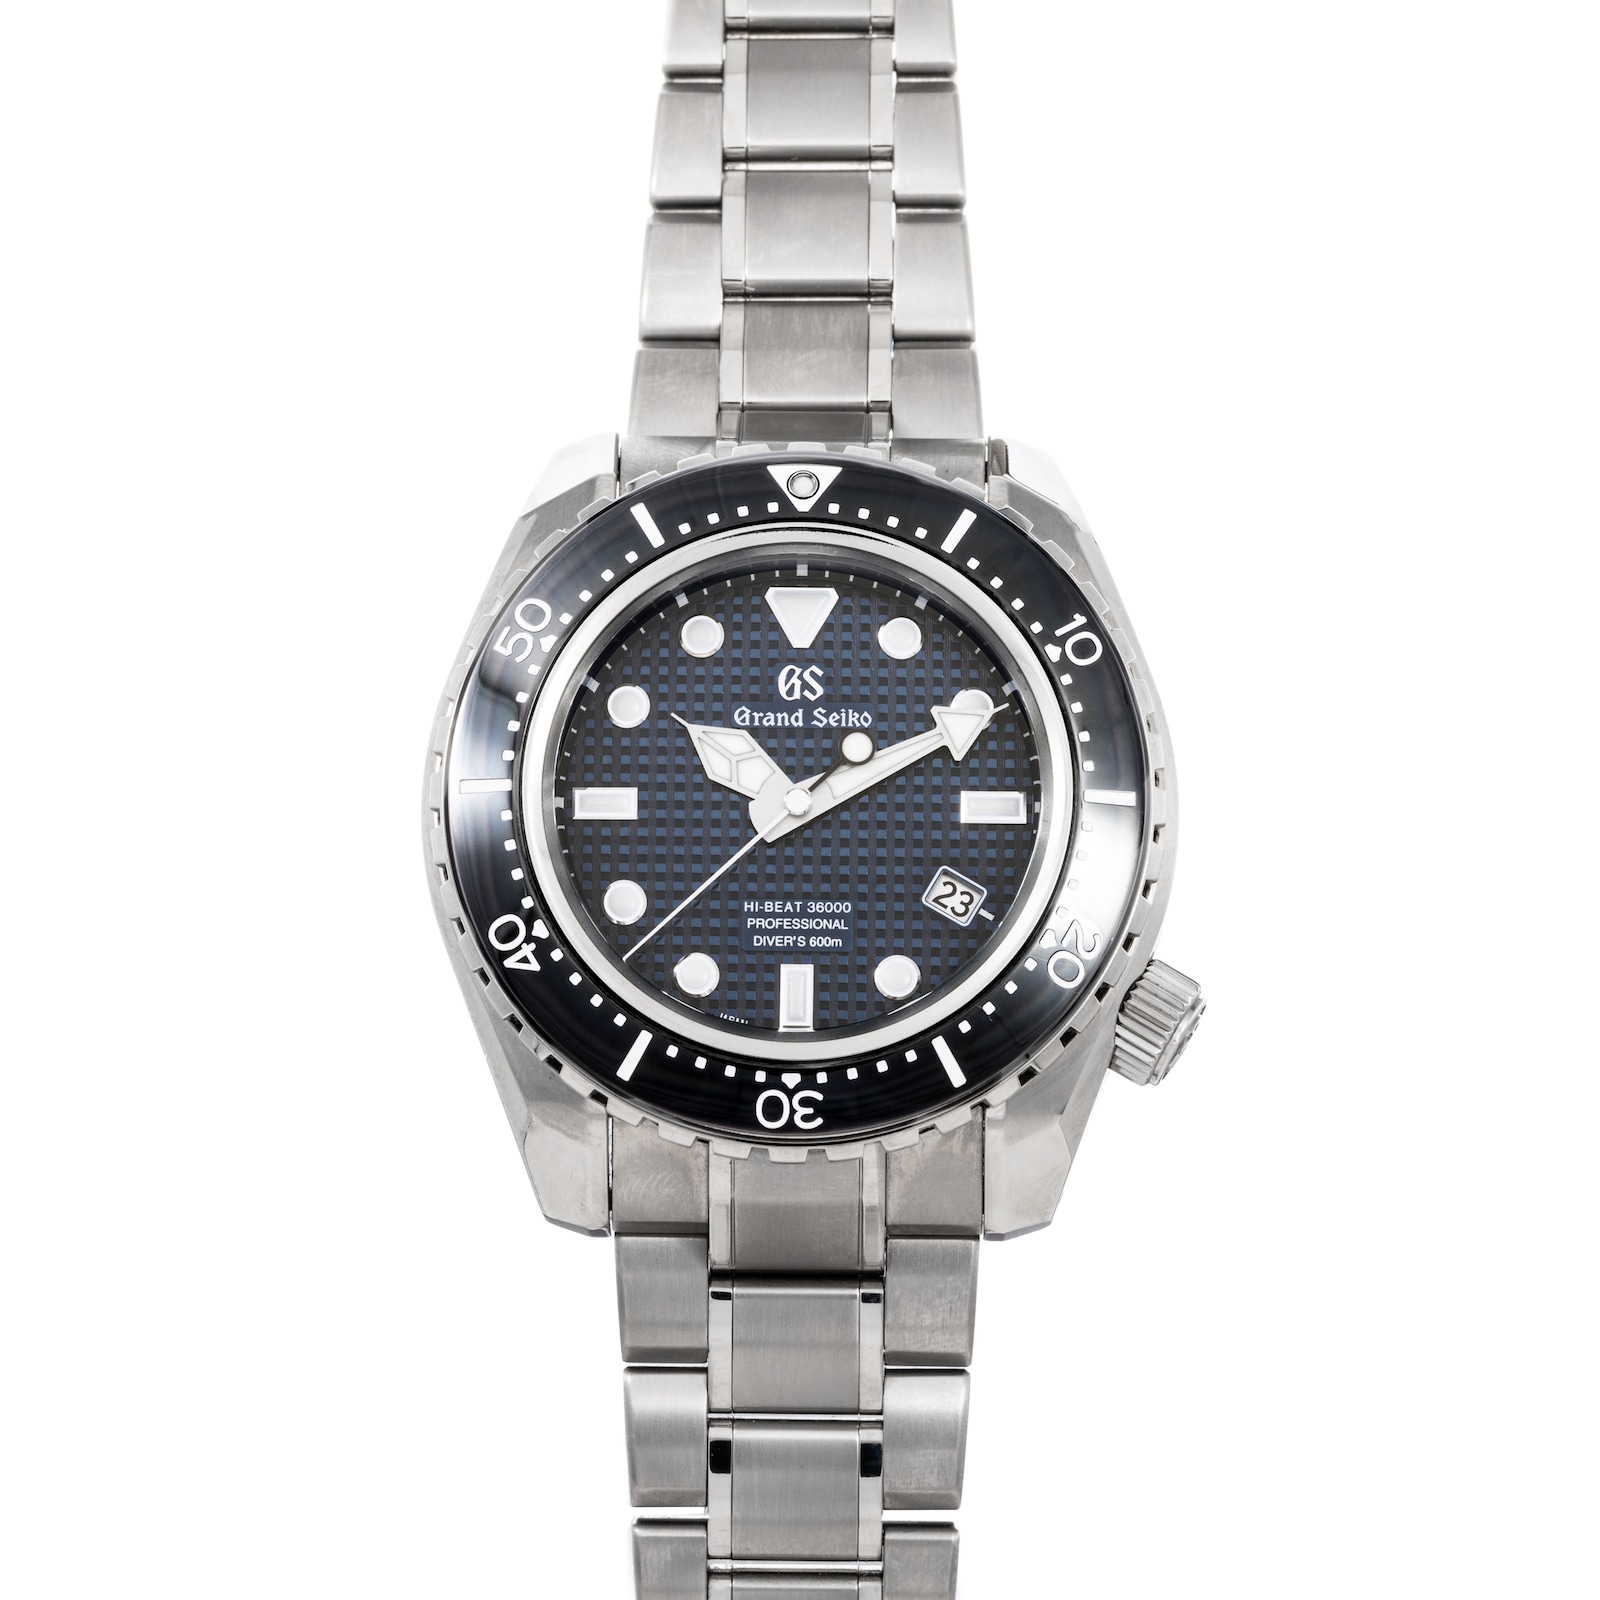 Pre-Owned Grand Seiko Hi-Beat Professional 600m Divers Limited Edition  001-103-02363 | Mayors